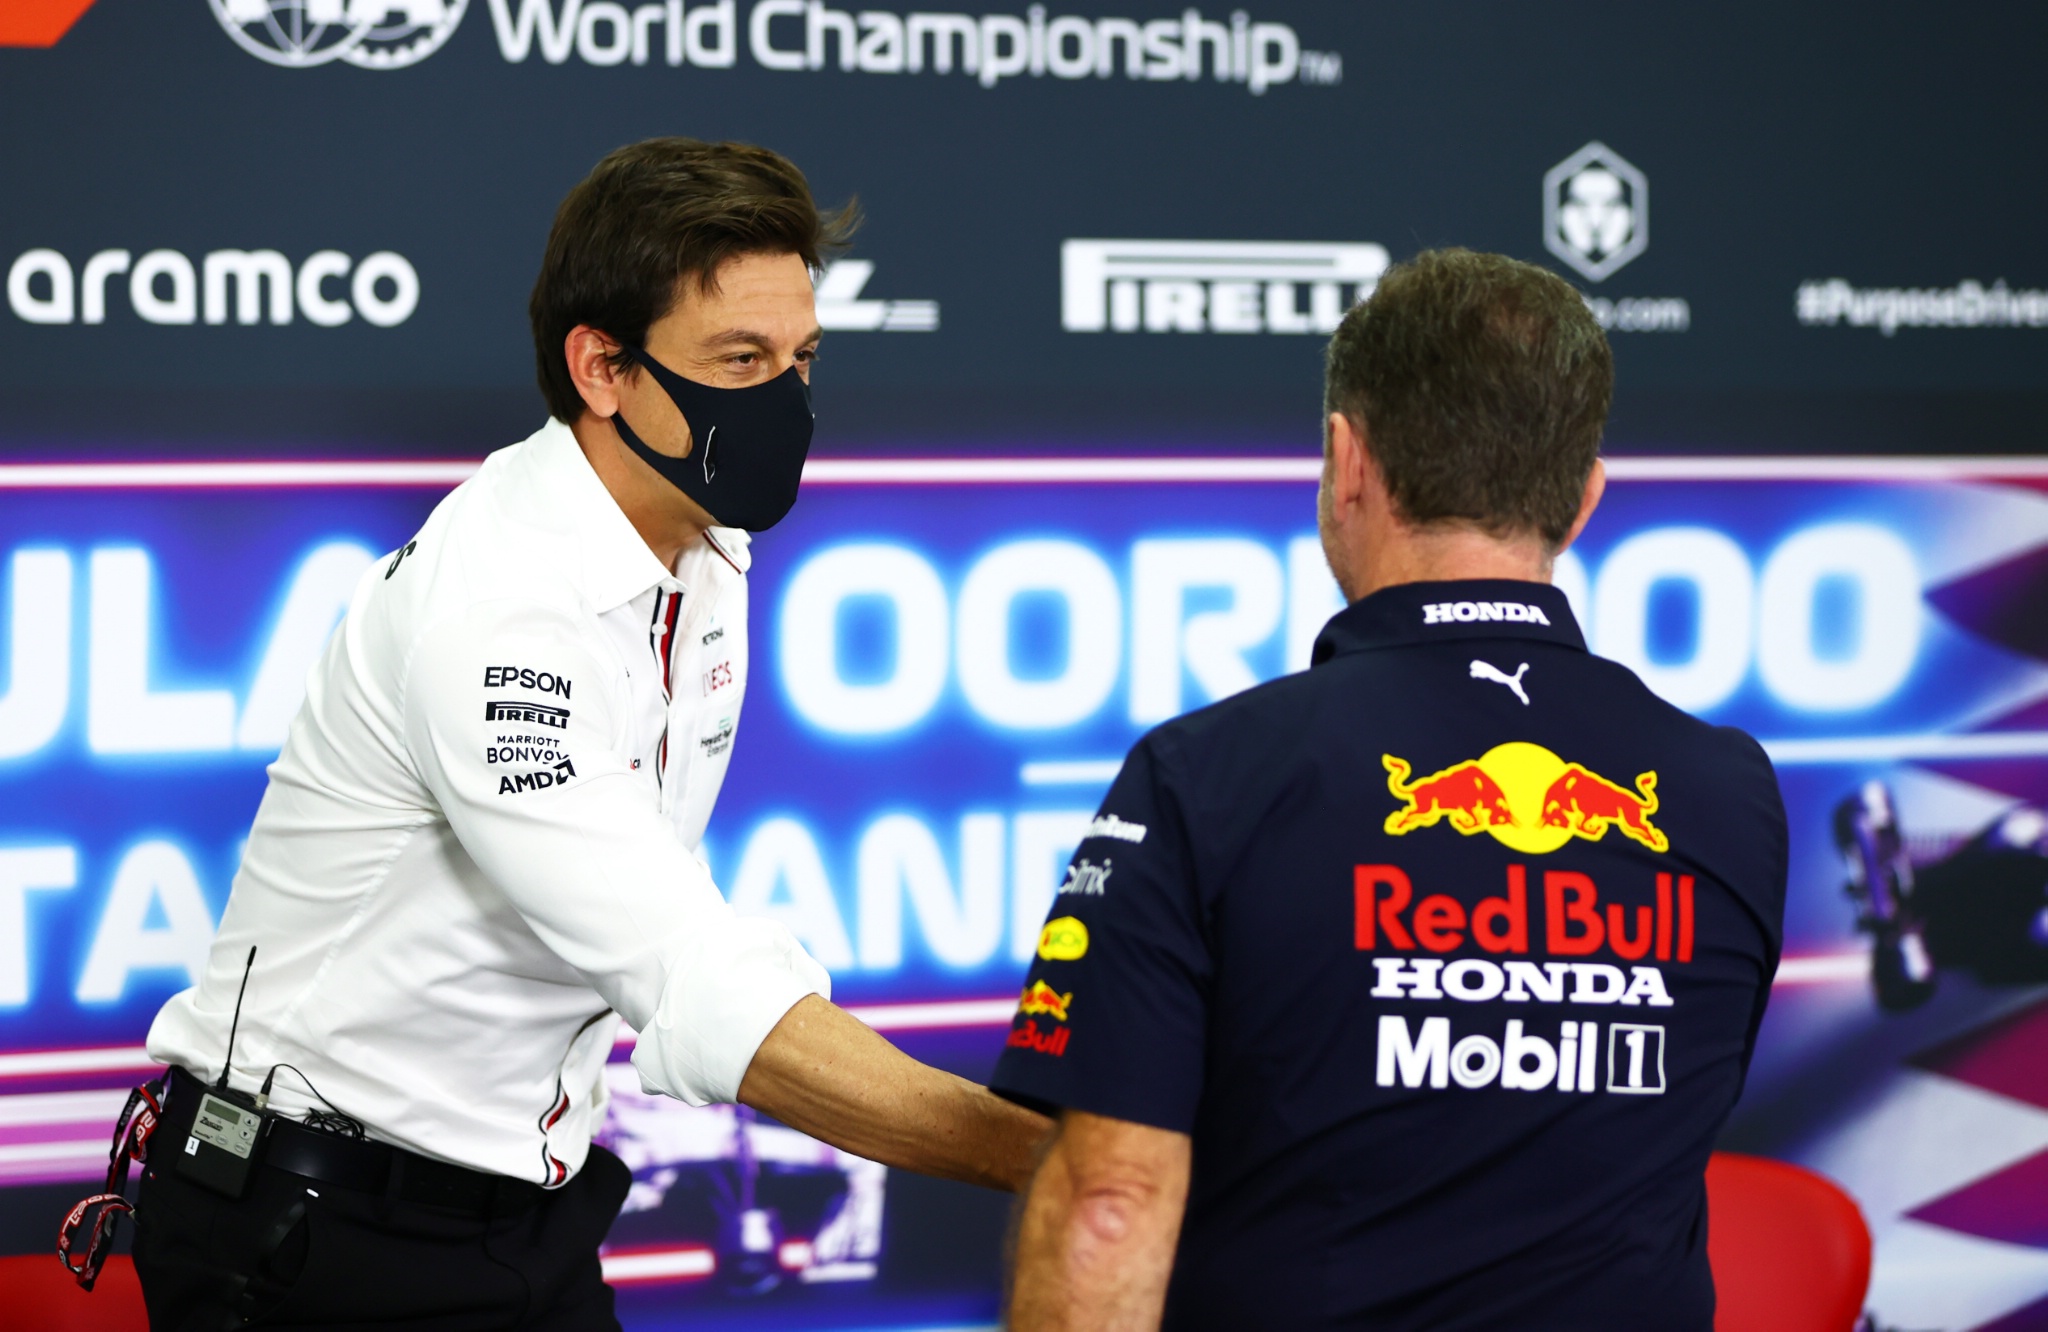 (L to R): Toto Wolff (GER) Mercedes AMG F1 Shareholder and Executive Director and Christian Horner (GBR) Red Bull Racing Team Principal in the FIA Press Conference.